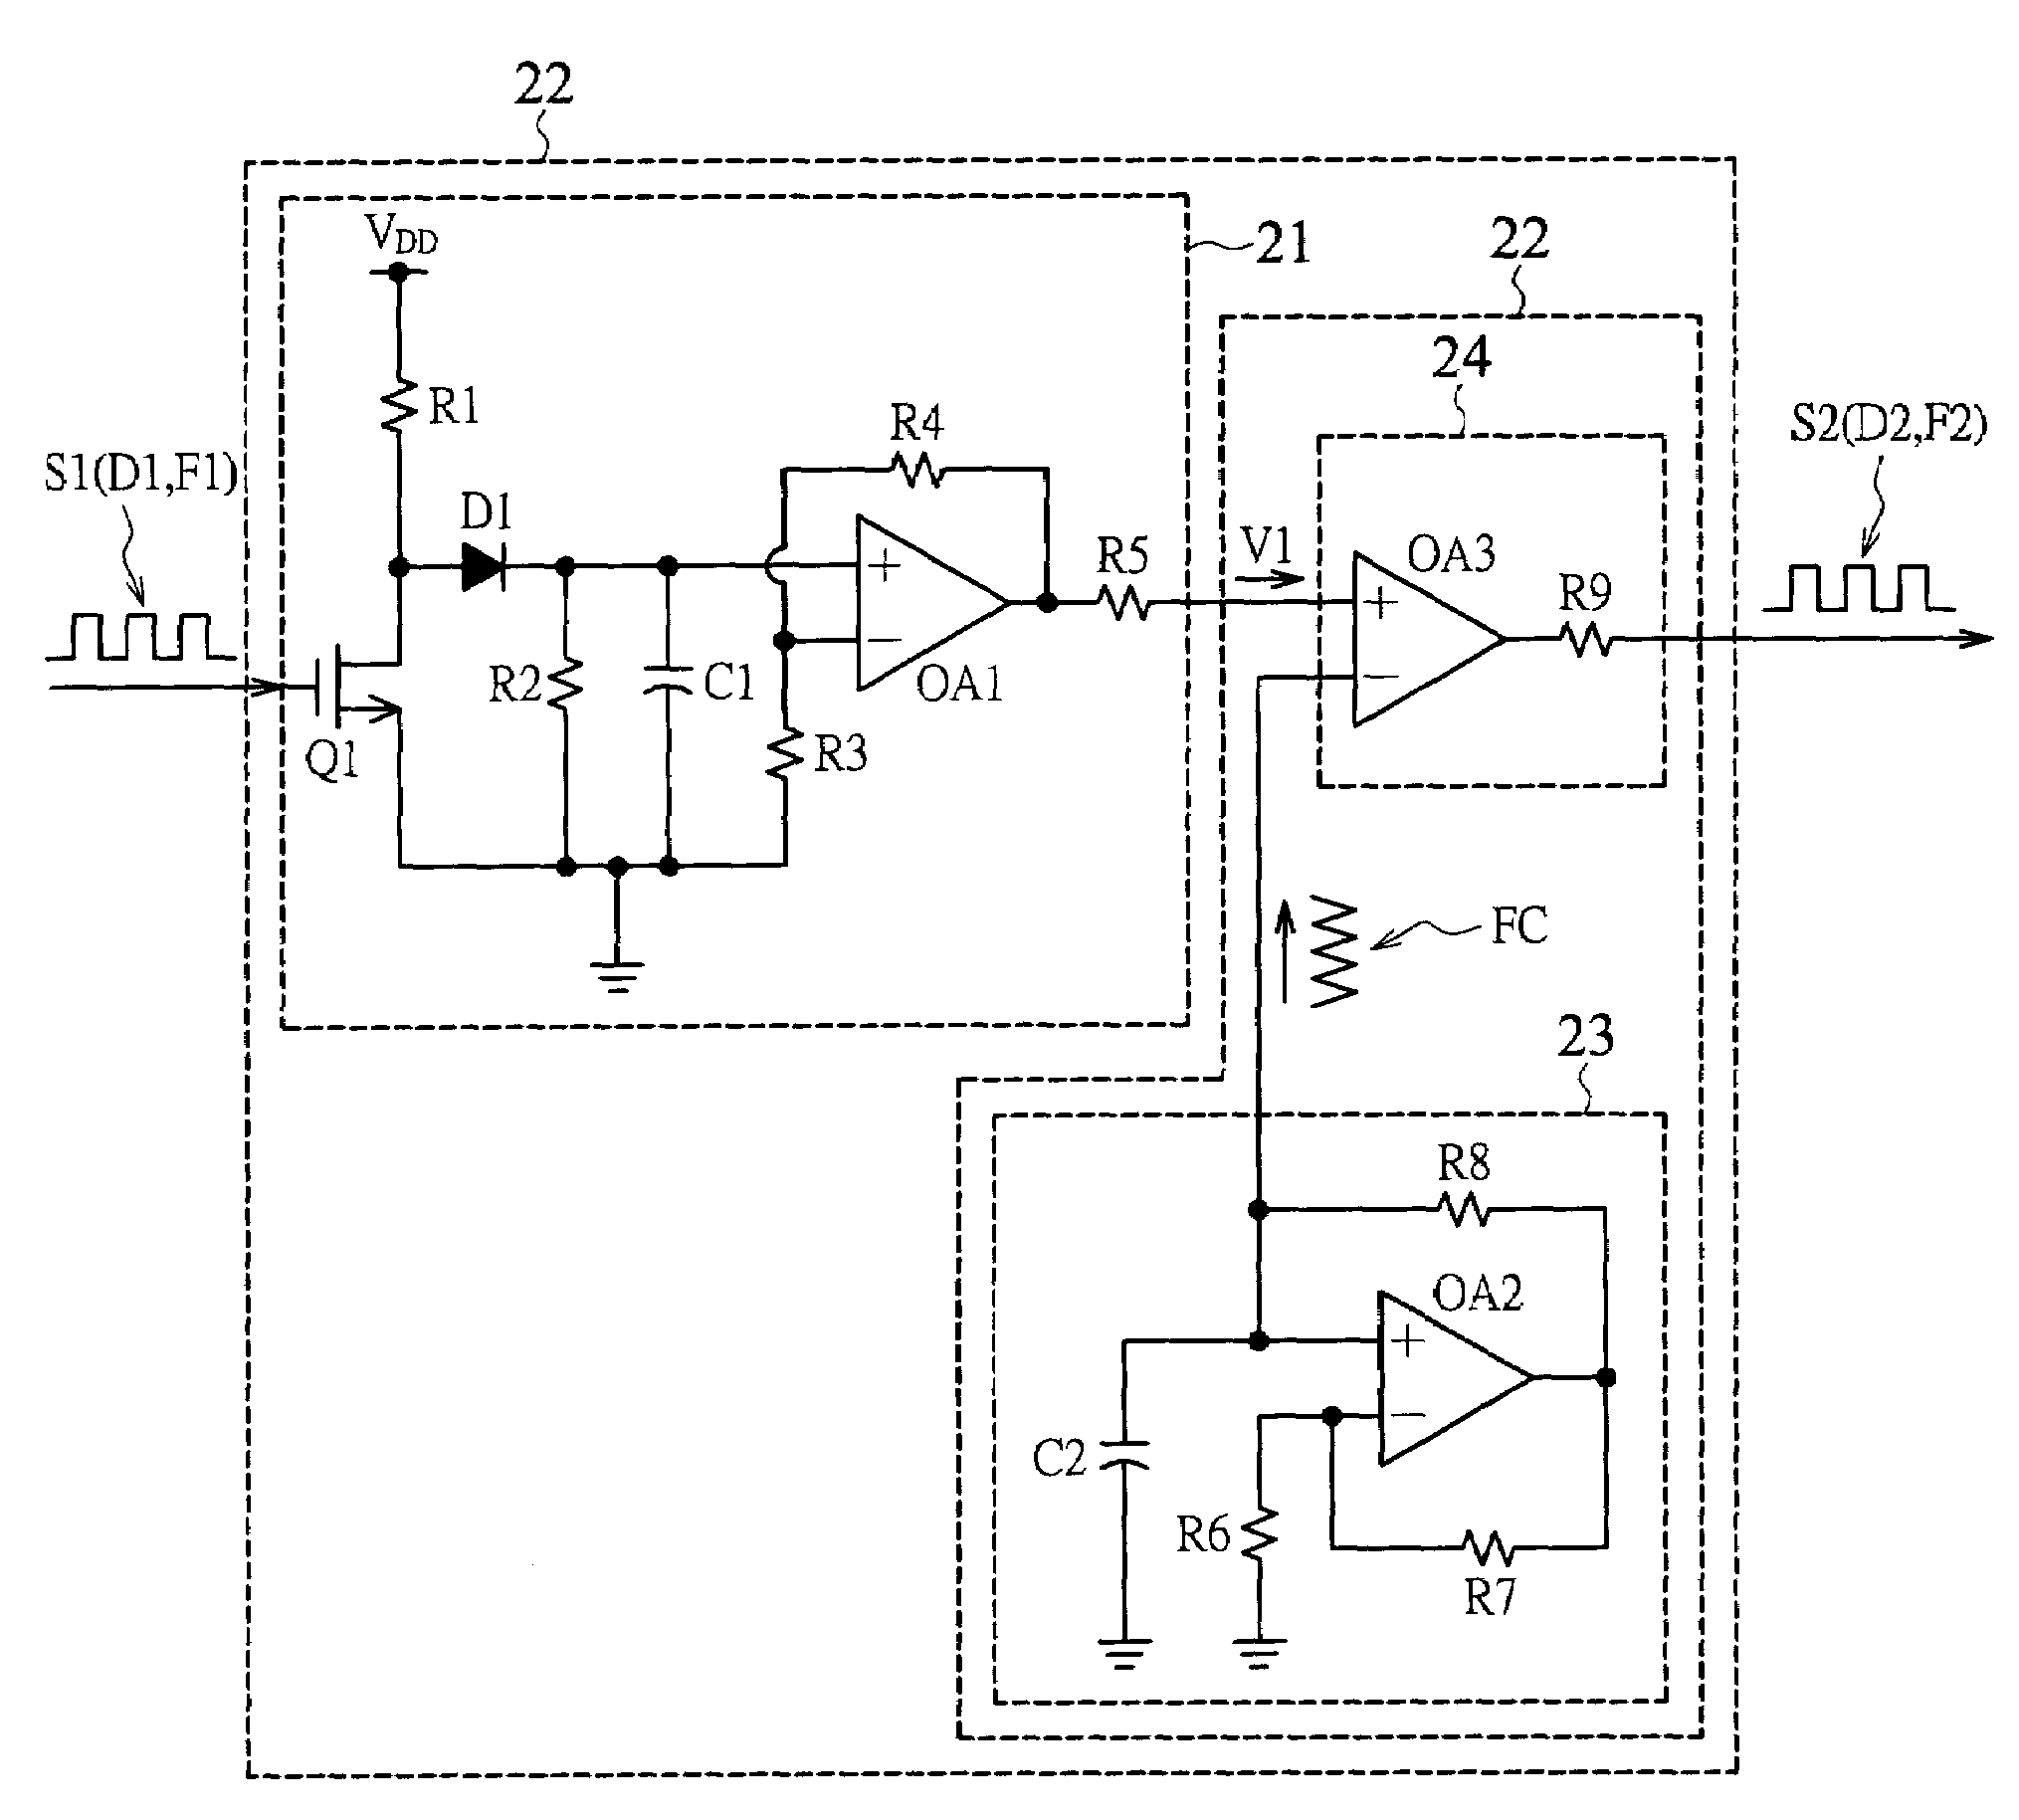 PWM buffer circuit for adjusting a frequency and a duty cycle of a PWM signal